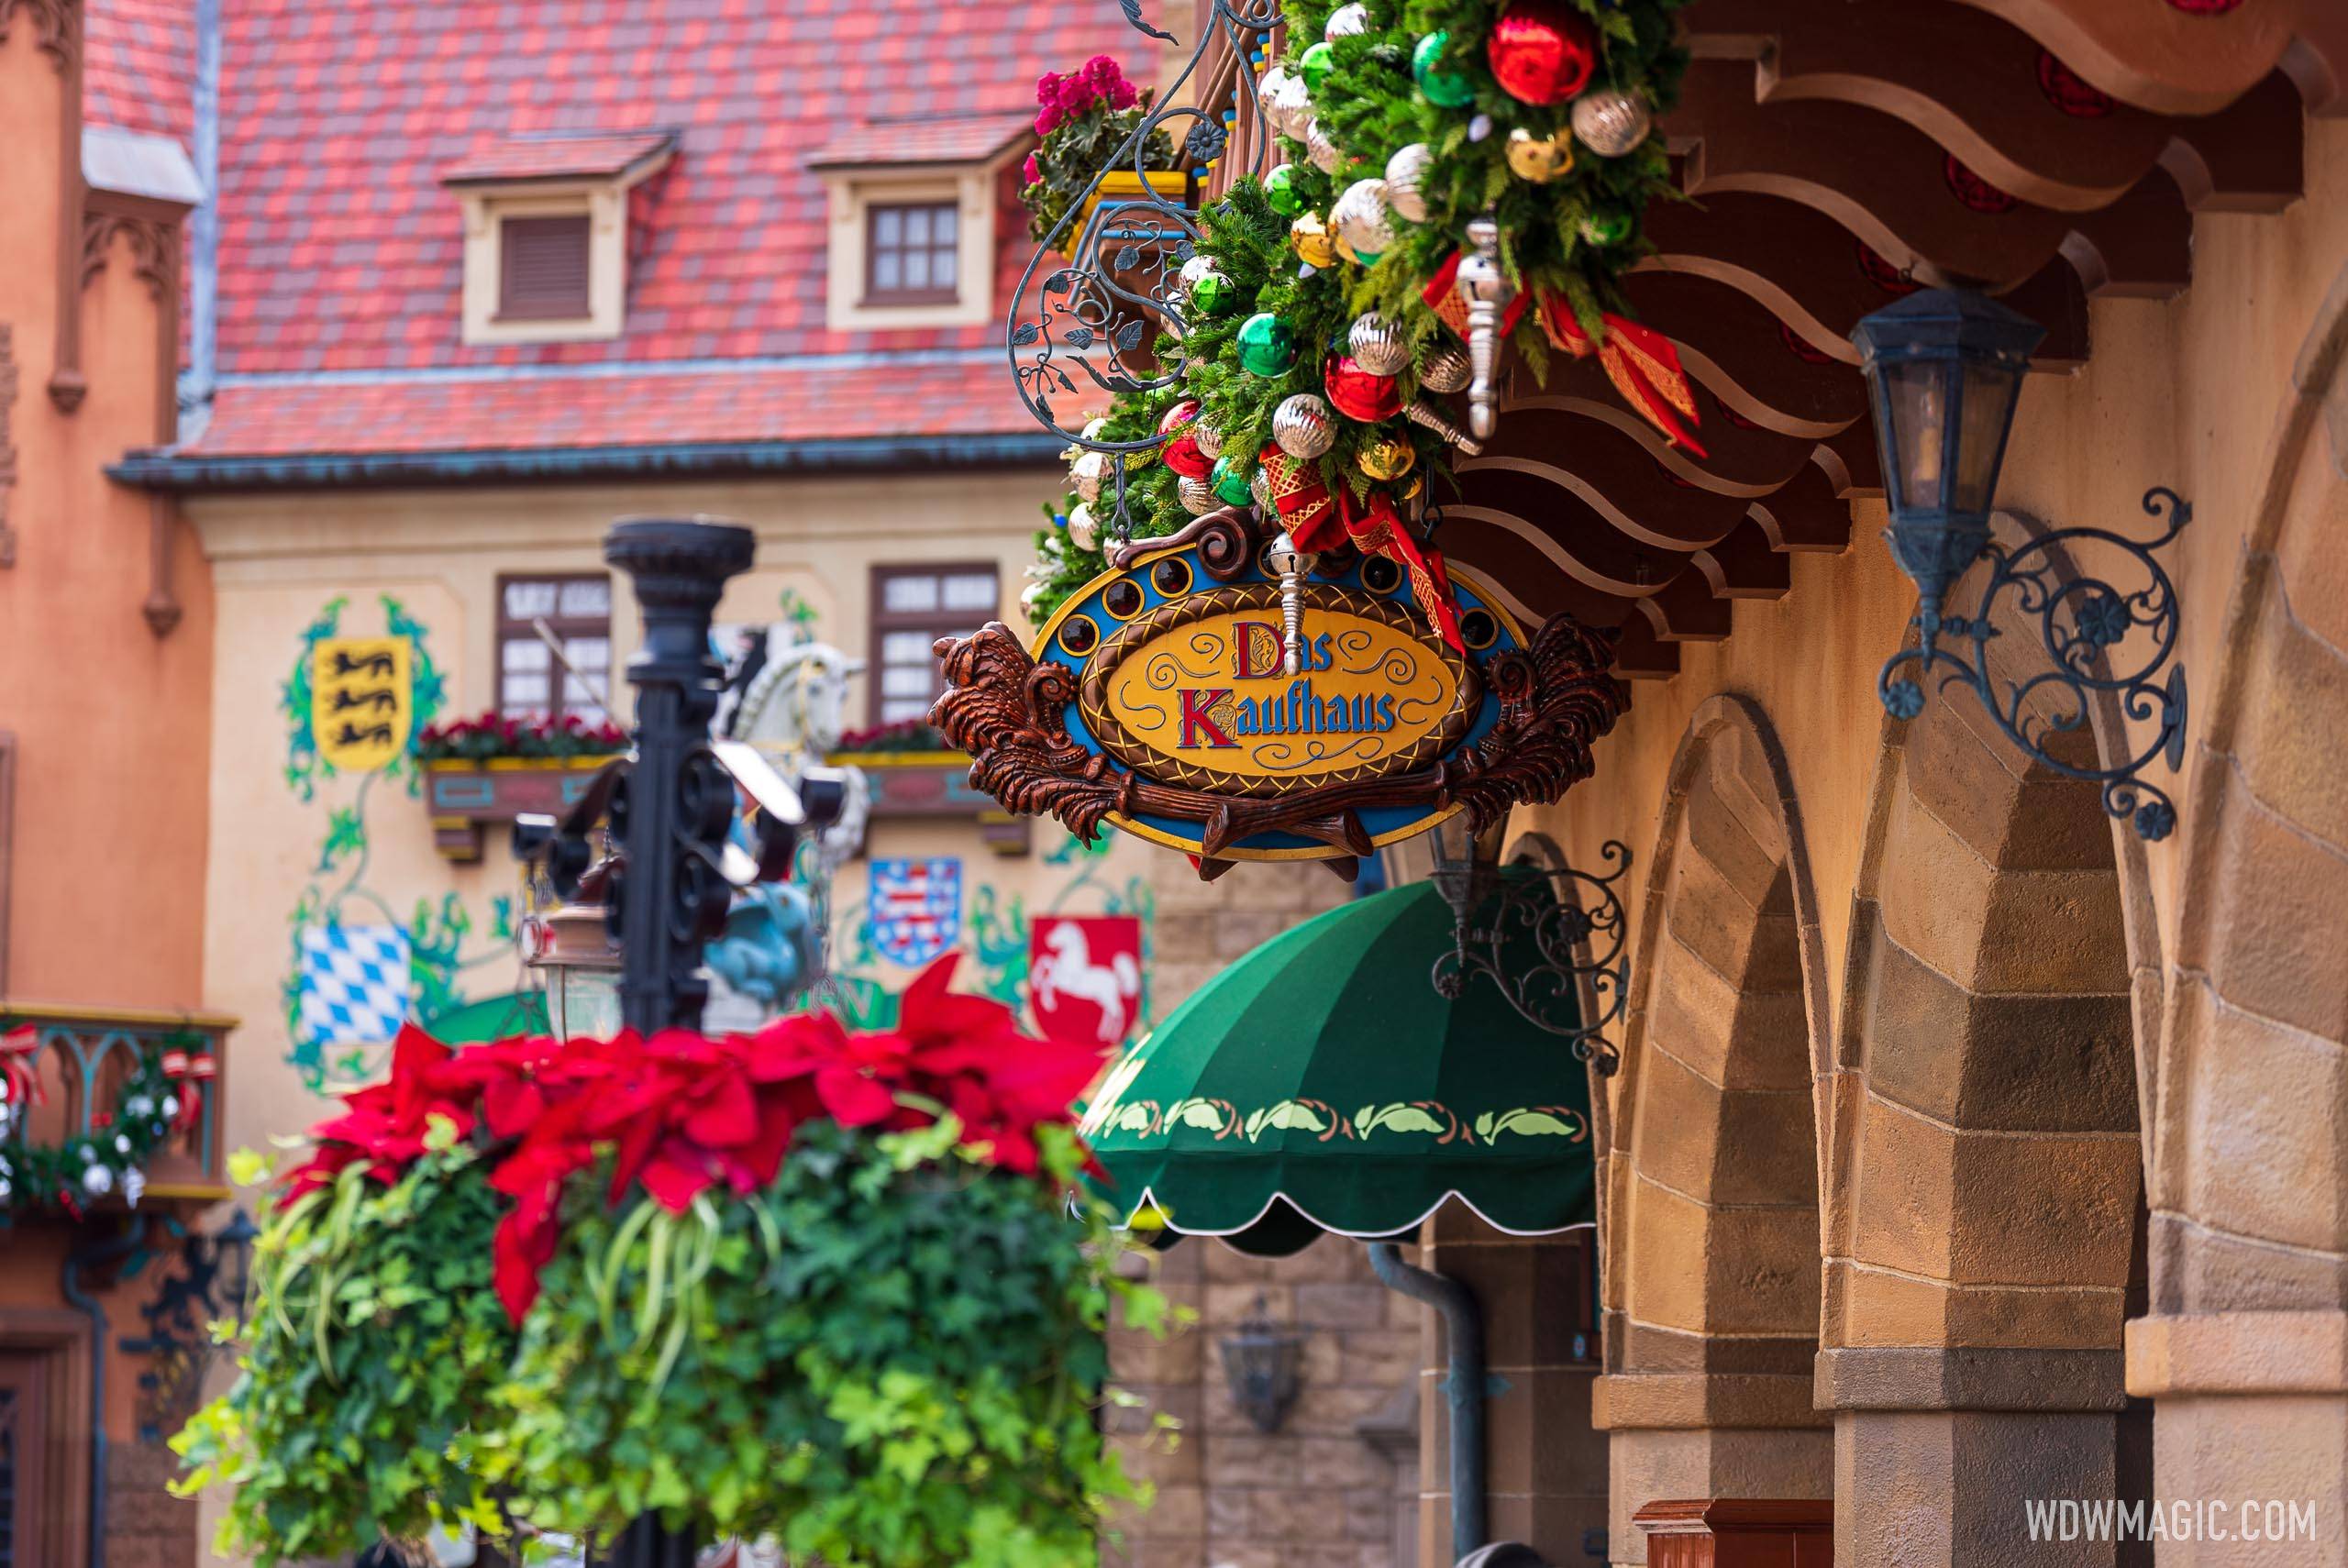 2022 EPCOT International Festival of the Holidays overview